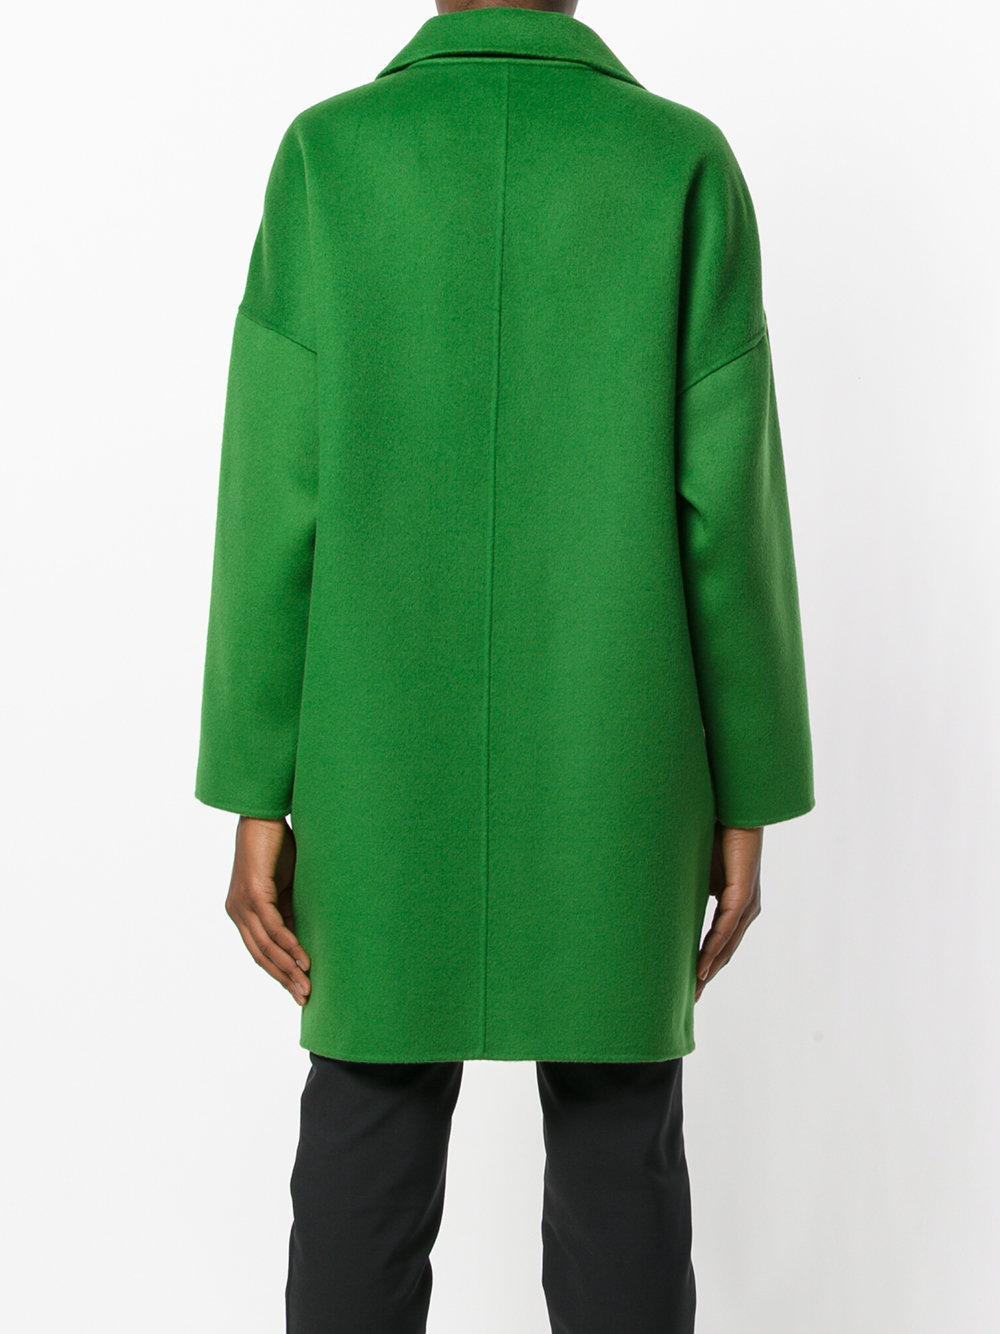 Lyst - P.A.R.O.S.H. Straight Fit Button Coat in Green